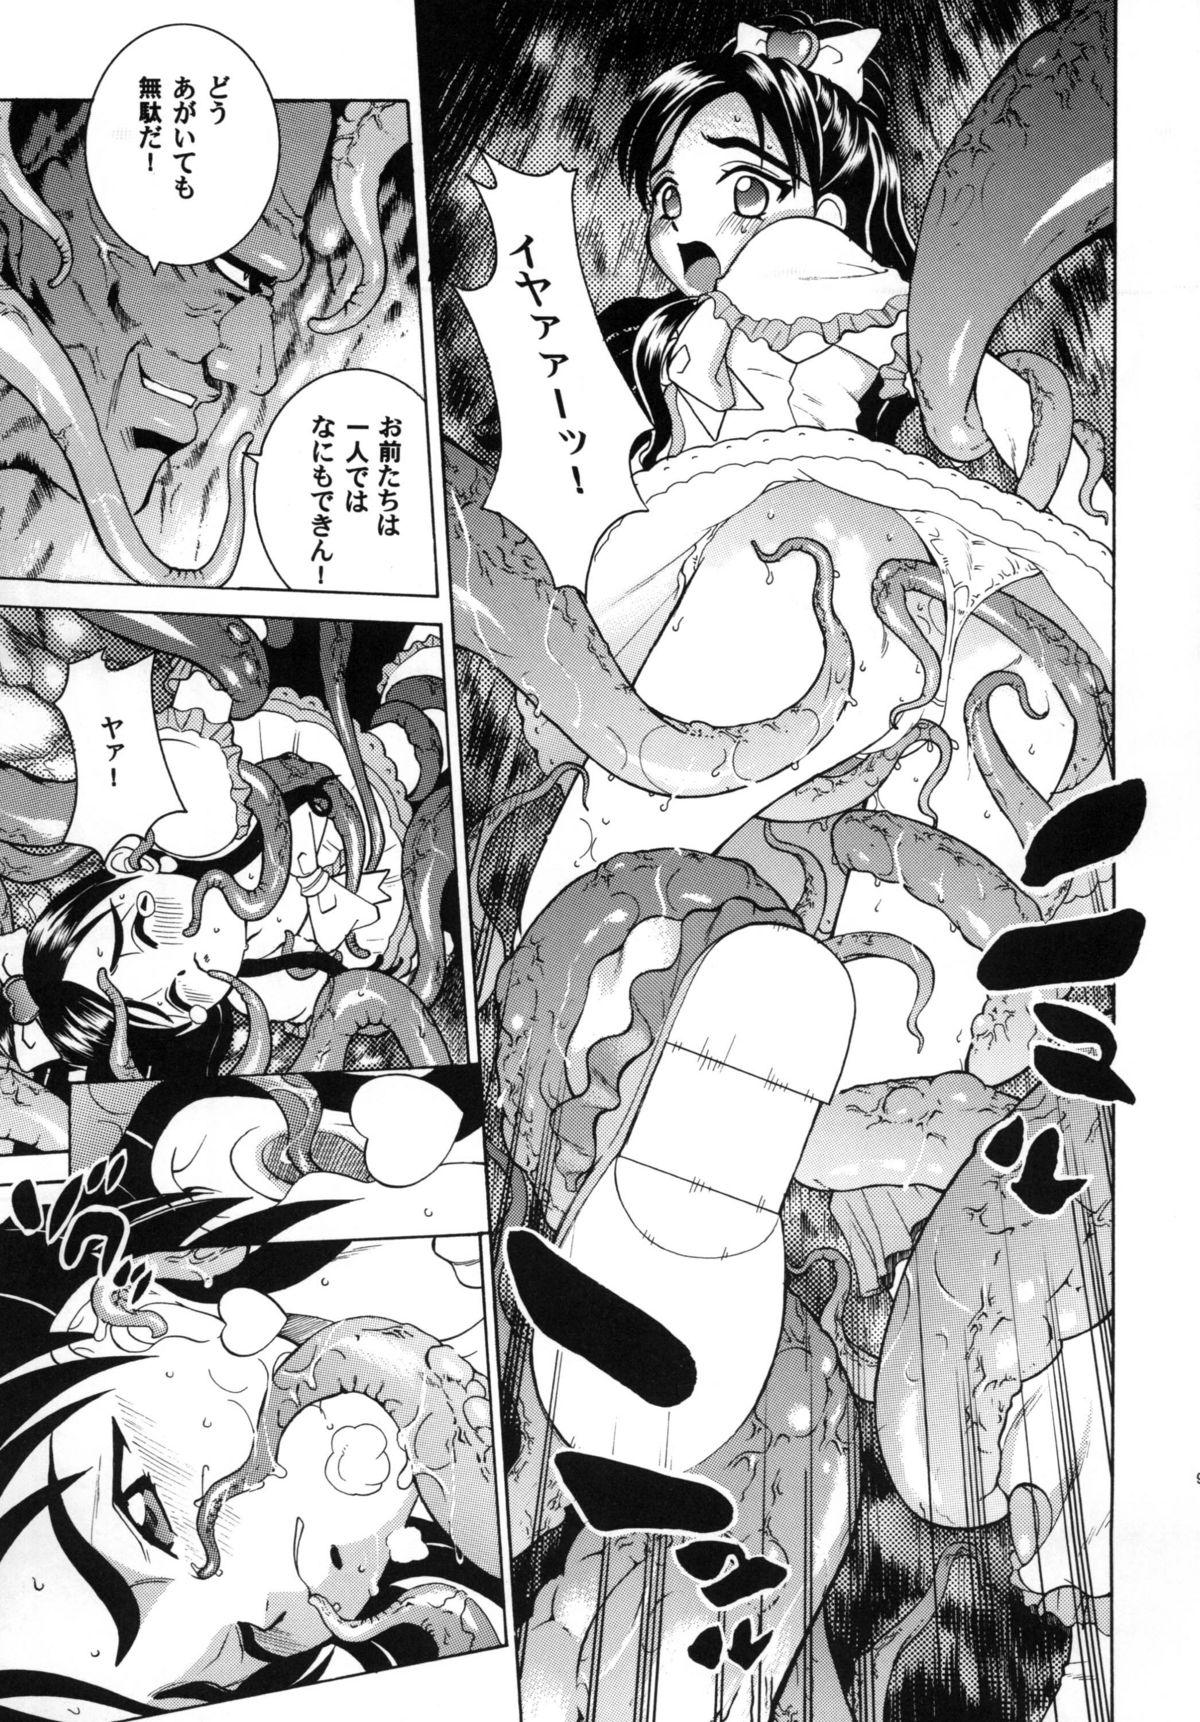 Eat ANGEL PAIN 13 - Pretty cure Brother Sister - Page 9